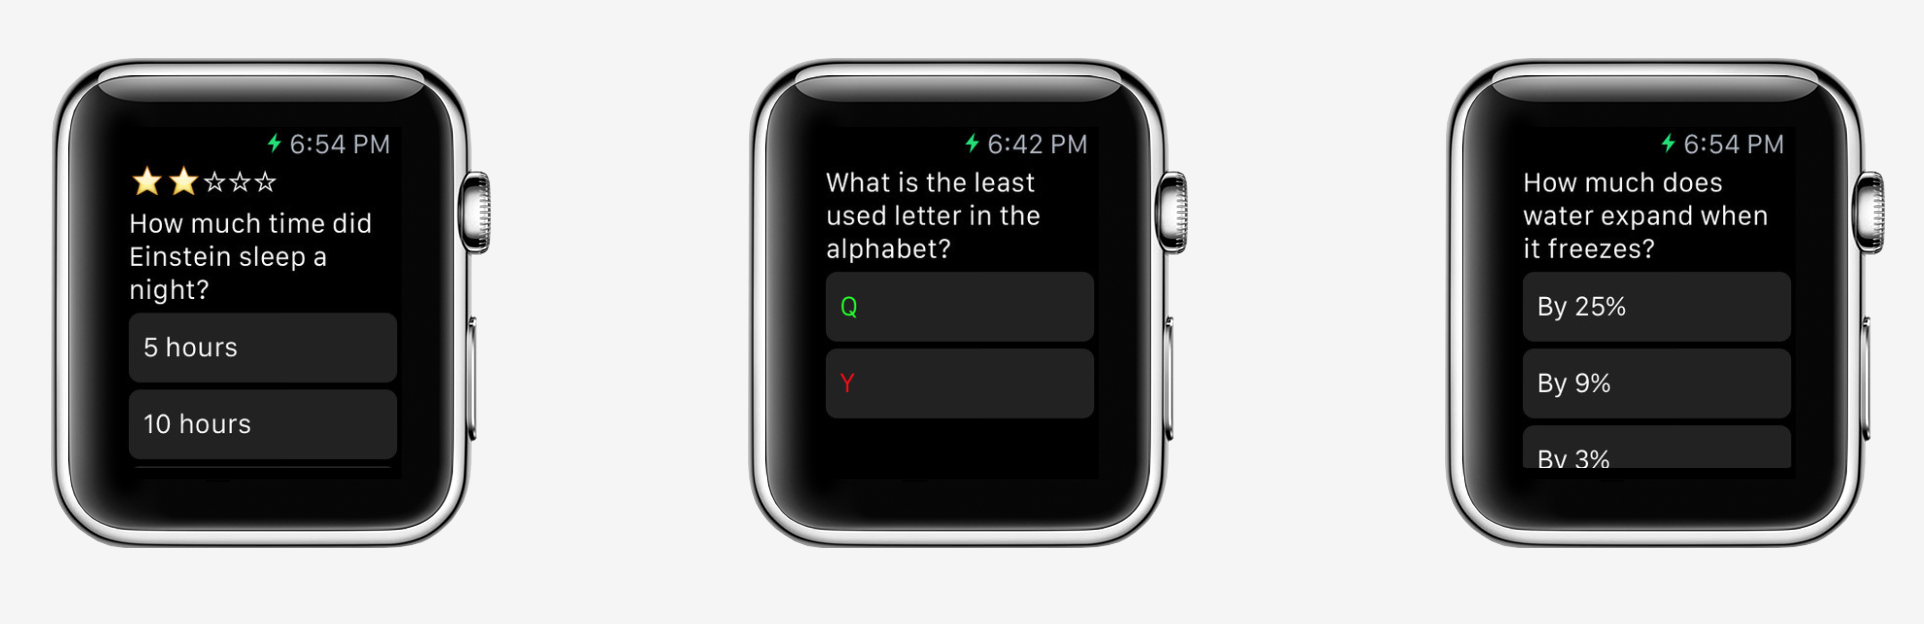 KnowWow for Apple Watch brings quick-fire fact learning to the wrist